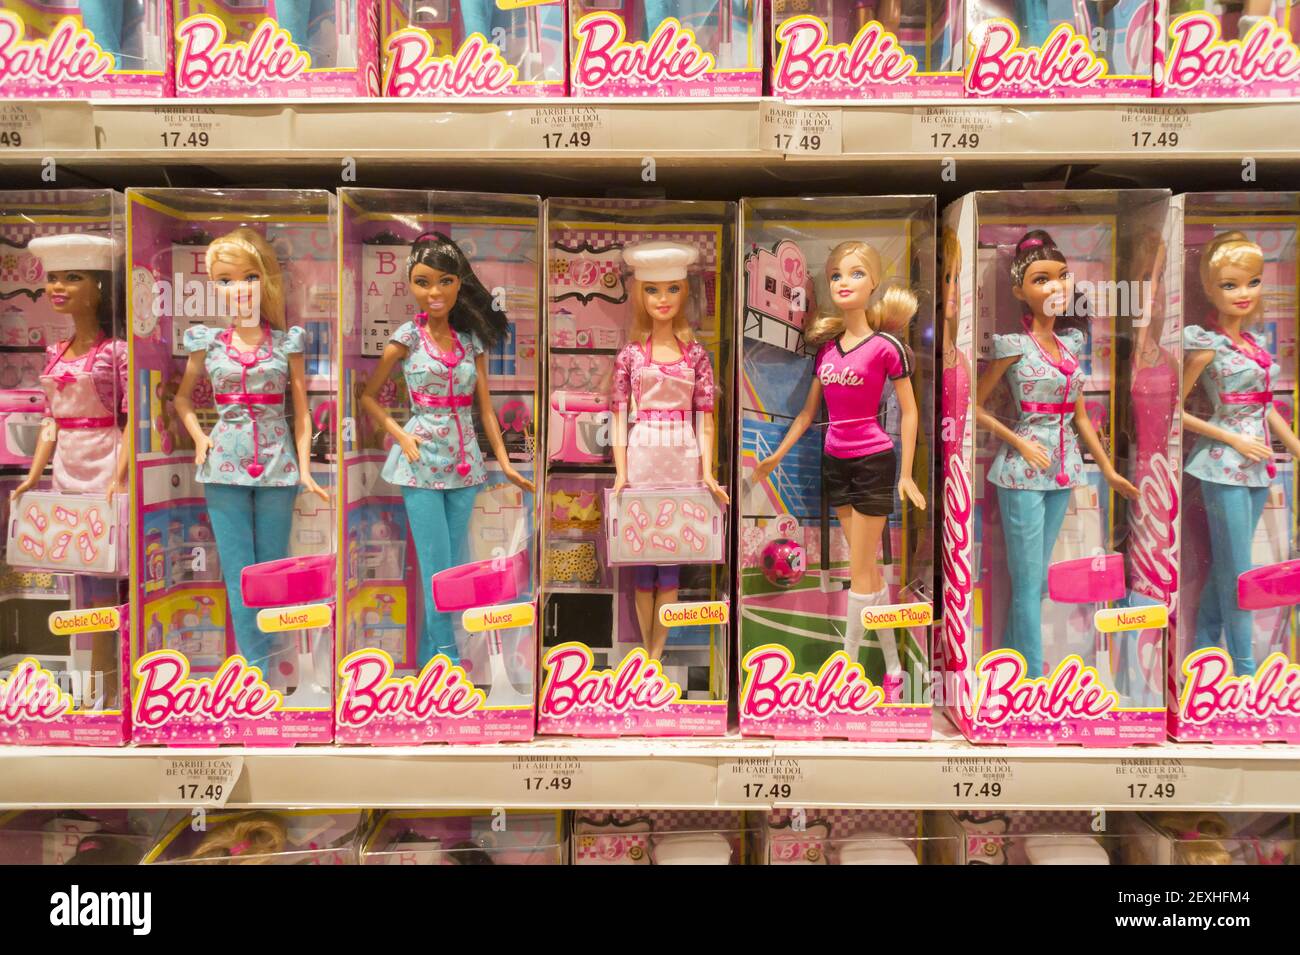 The Barbie display at Toys R Us in Times Square in New York on Tuesday,  November 25, 2014. (Photo by Richard B. Levine Stock Photo - Alamy